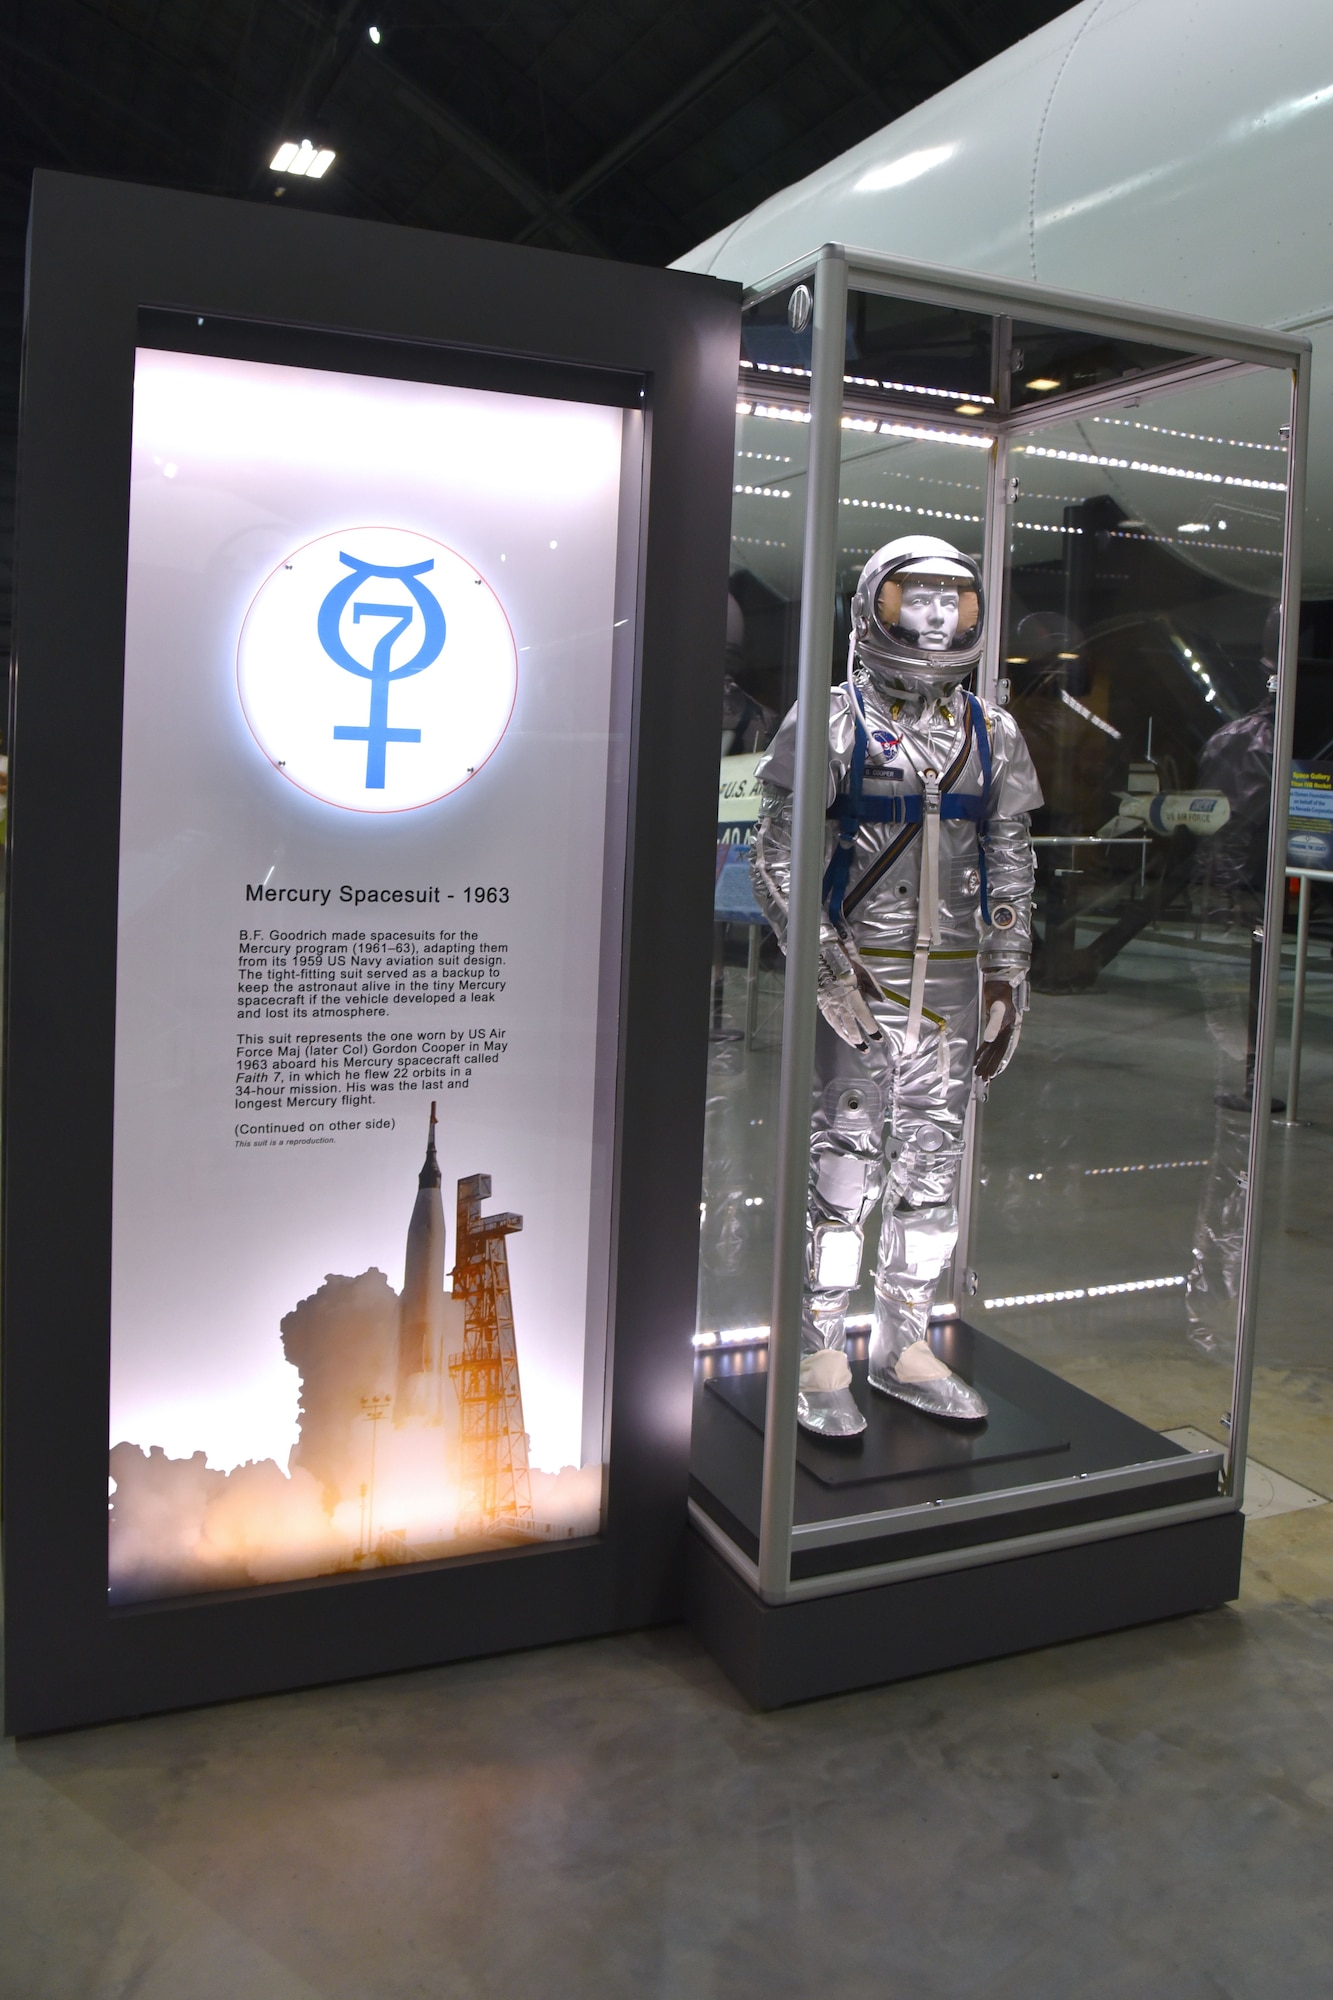 This space suit represents the one worn by U.S. Air Force Maj. (later Col.) Gordon Cooper in May 1963 aboard his Mercury craft called Faith 7, in which he flew 22 orbits in a 34-hour mission. This suit is a reproduction and is on display in the museum's fourth building.(U.S. Air Force photo by Ken LaRock)